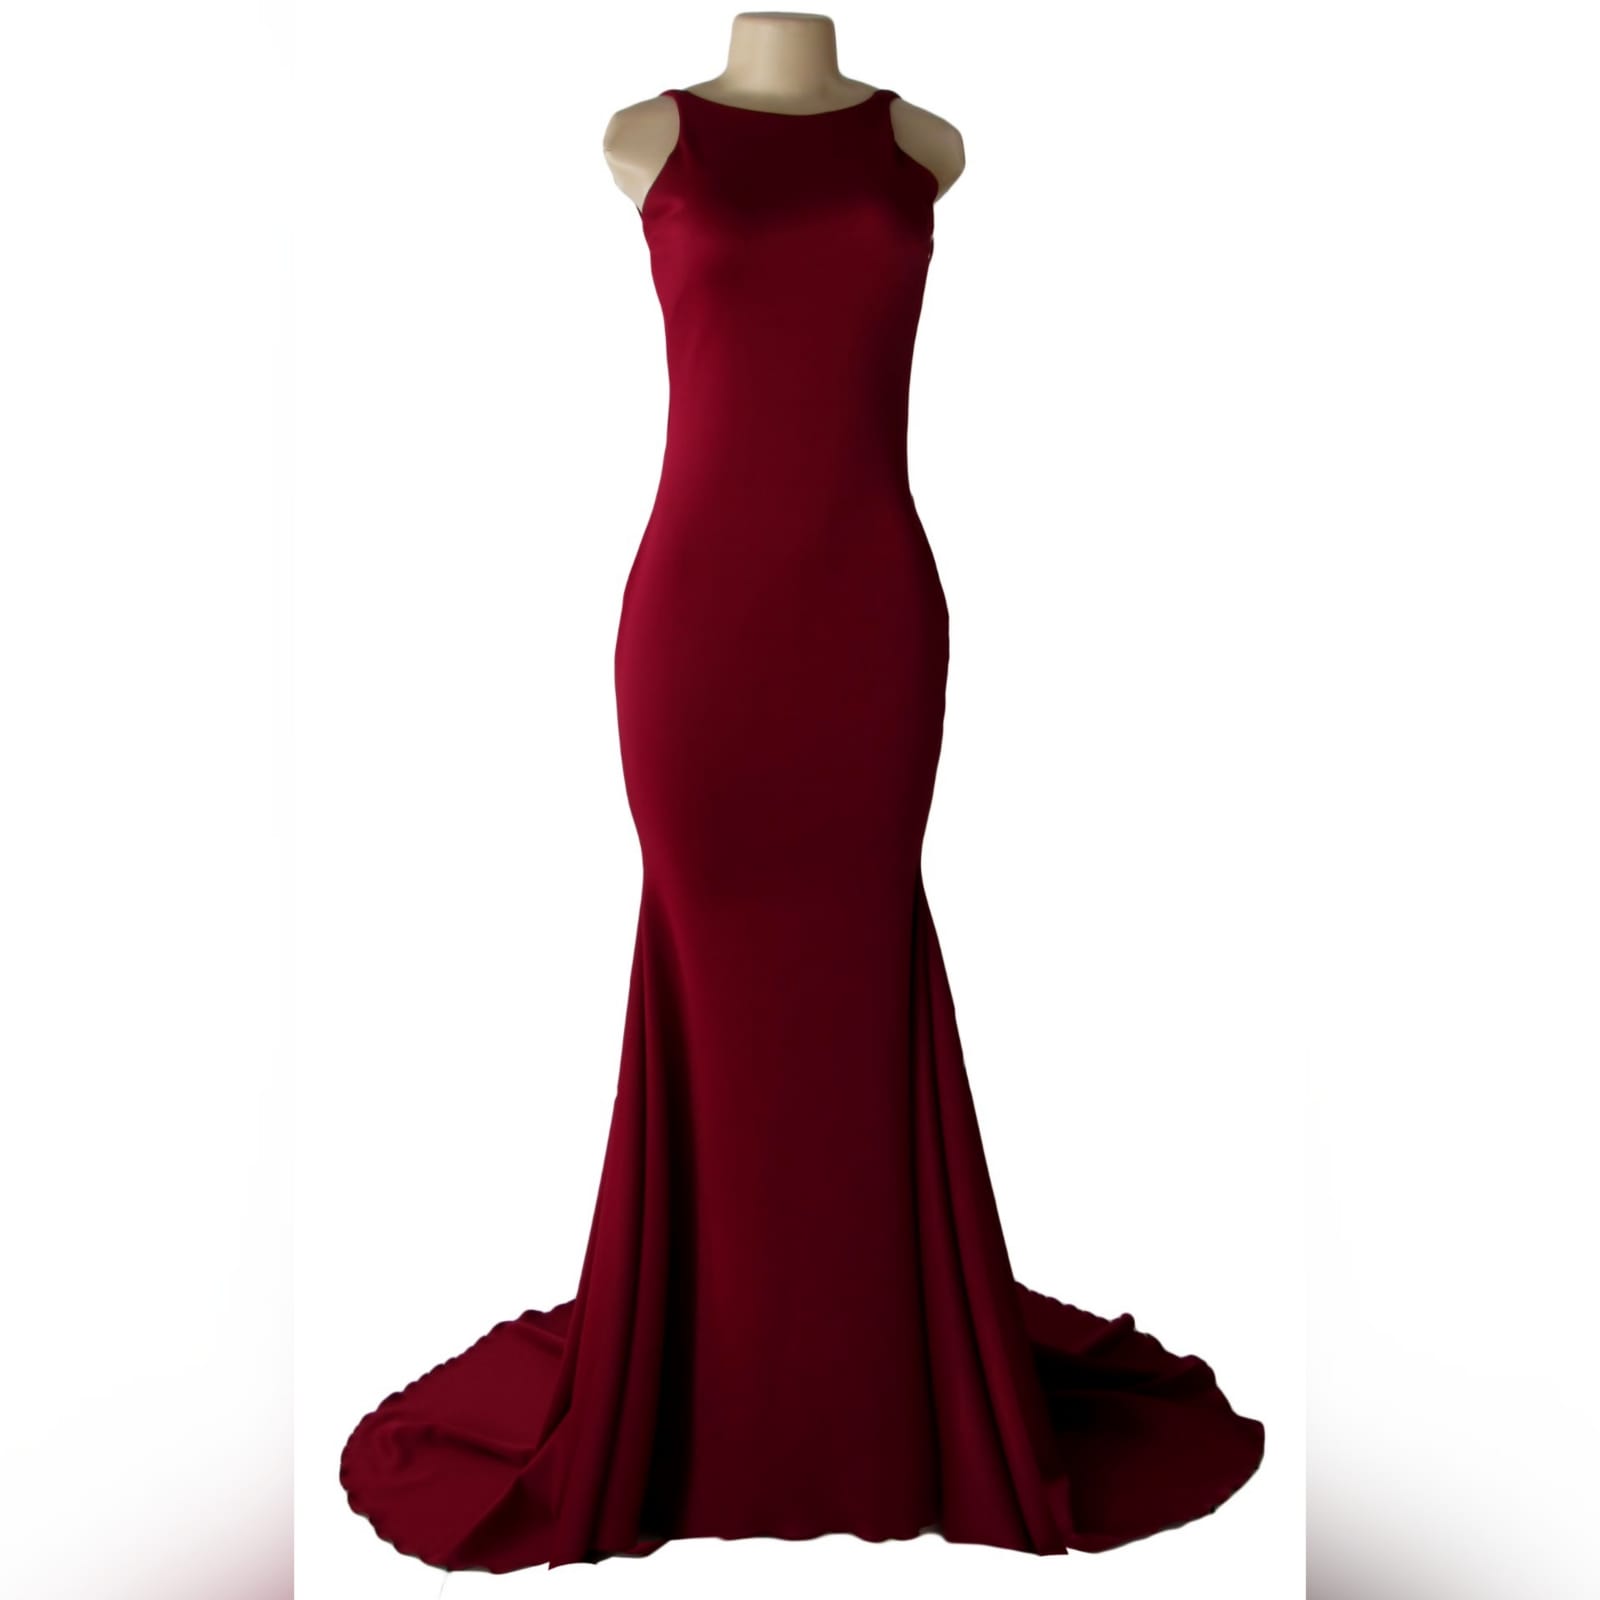 Maroon simple soft mermaid prom dress 4 maroon simple soft mermaid prom dress with a jewel neckline and a low rounded open back, thin shoulder straps and a train.